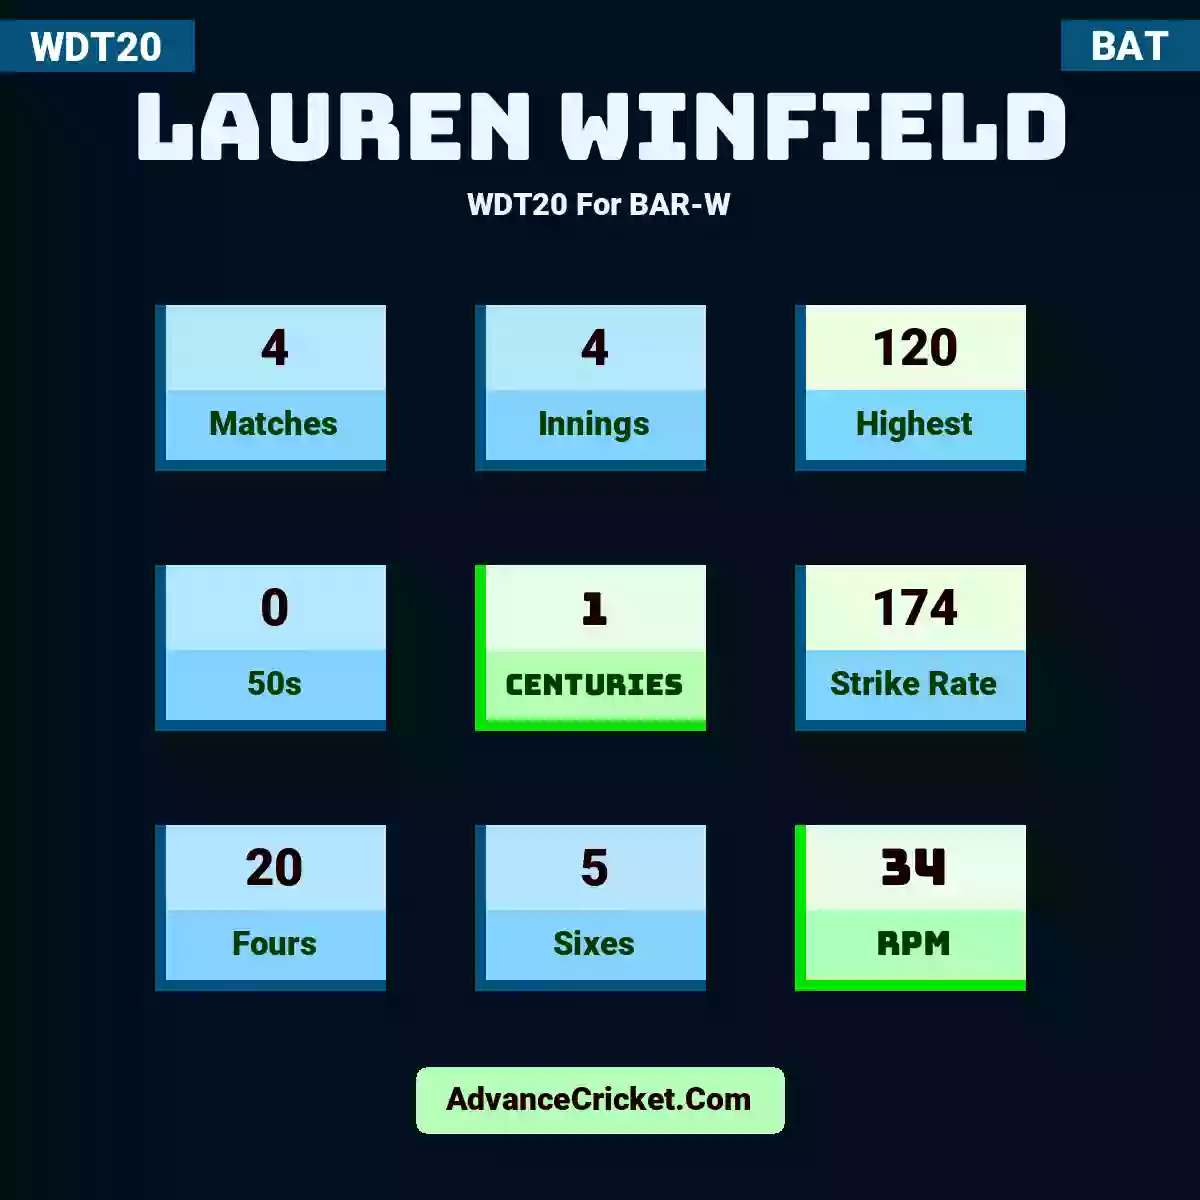 Lauren Winfield WDT20  For BAR-W, Lauren Winfield played 4 matches, scored 120 runs as highest, 0 half-centuries, and 1 centuries, with a strike rate of 174. L.Winfield hit 20 fours and 5 sixes, with an RPM of 34.